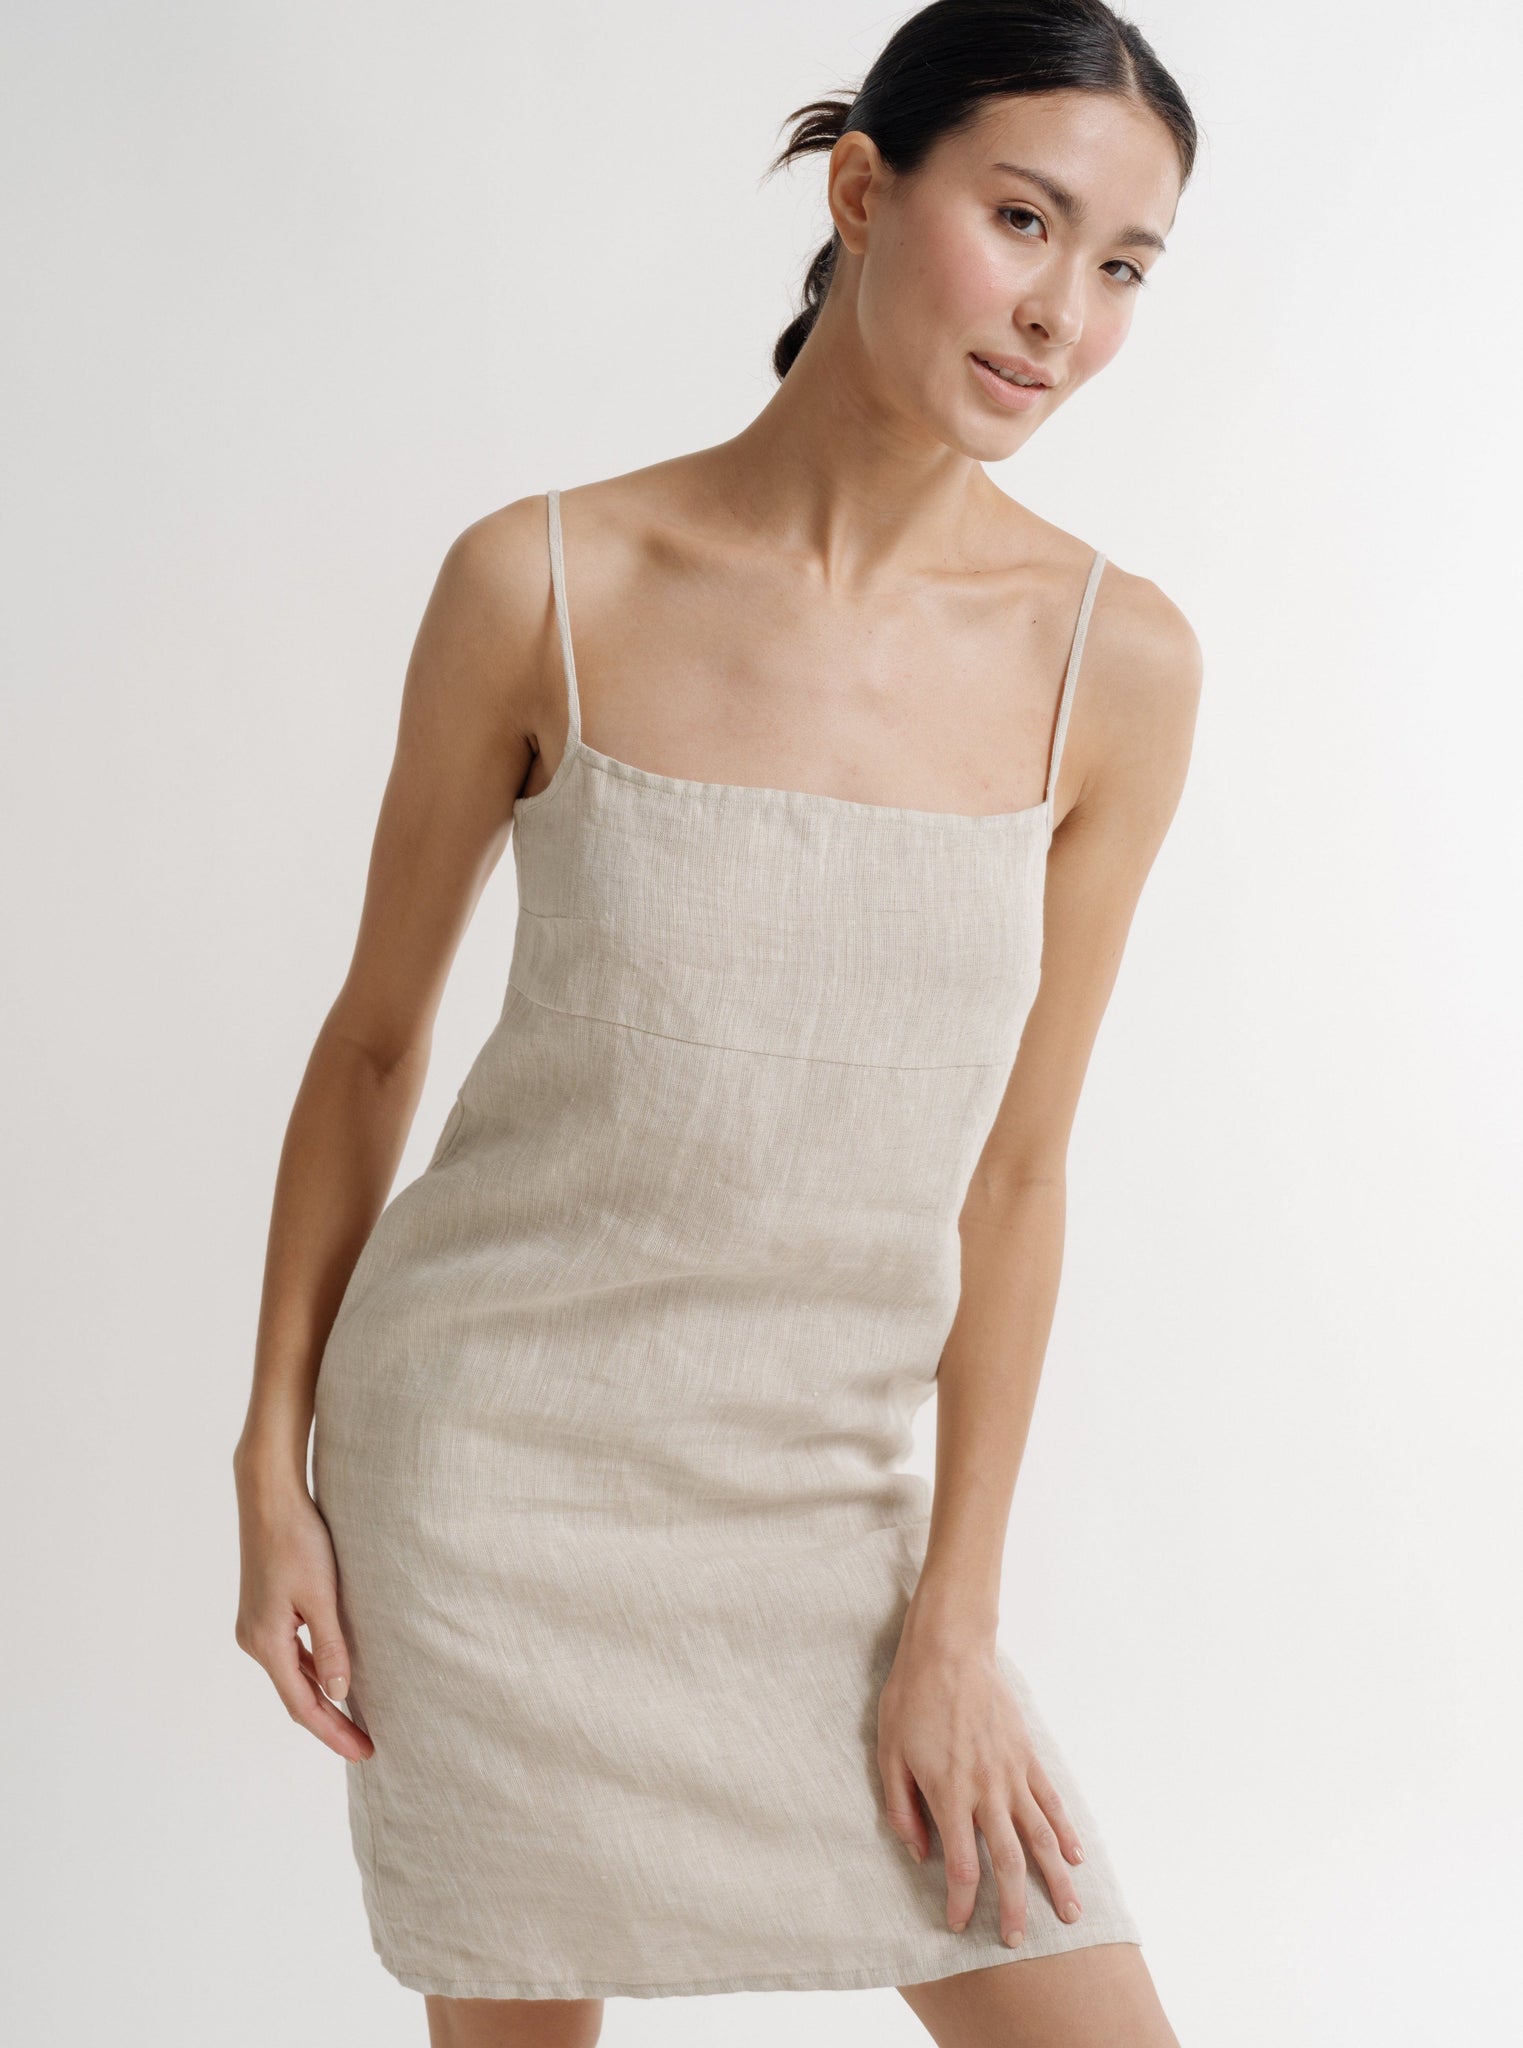 The model is wearing a Linen Mini Dress - Natural Linen - Pre-order with adjustable straps and a square neckline.